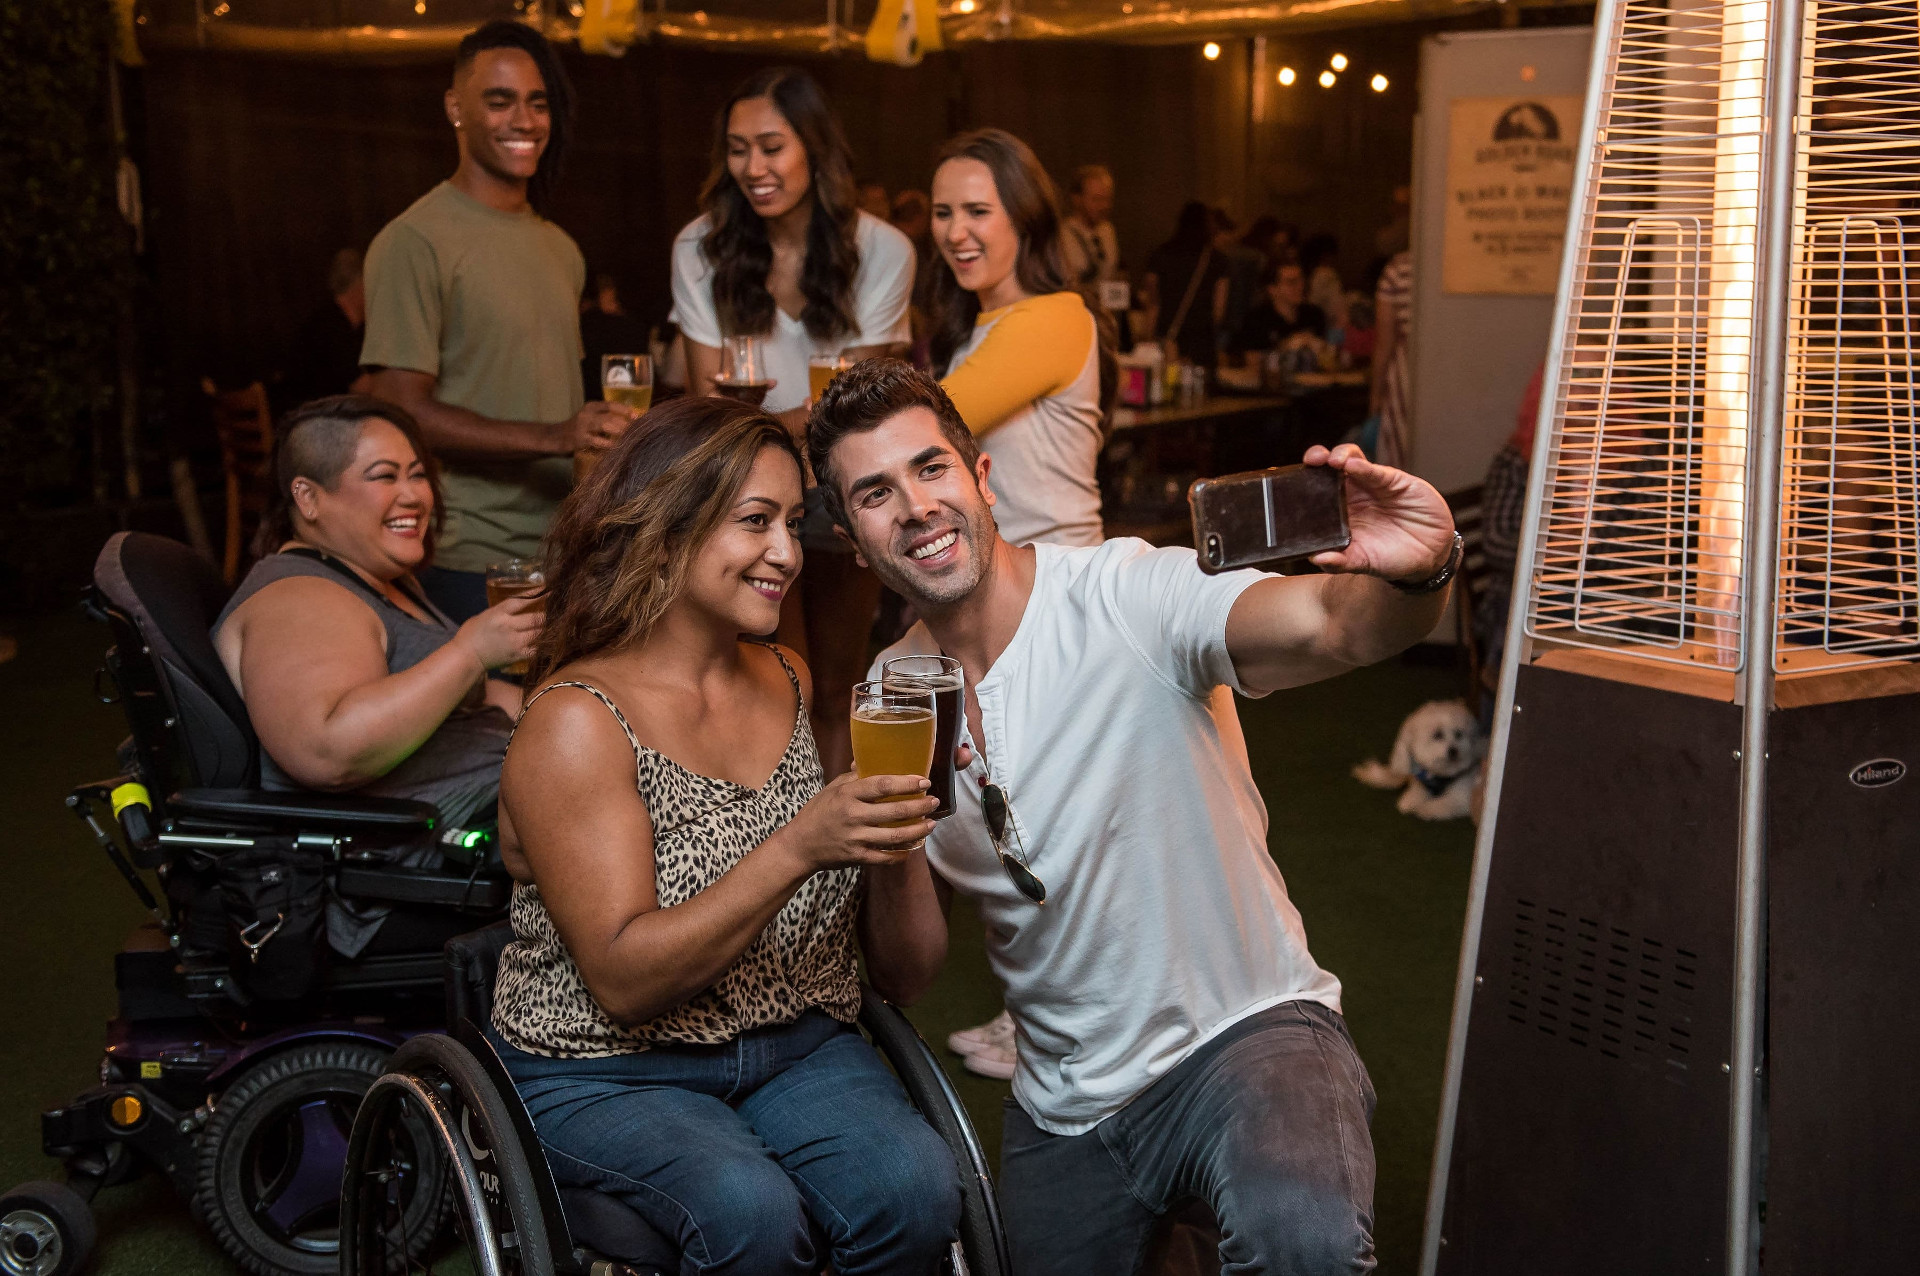 Two wheelchair users share drinks with other people